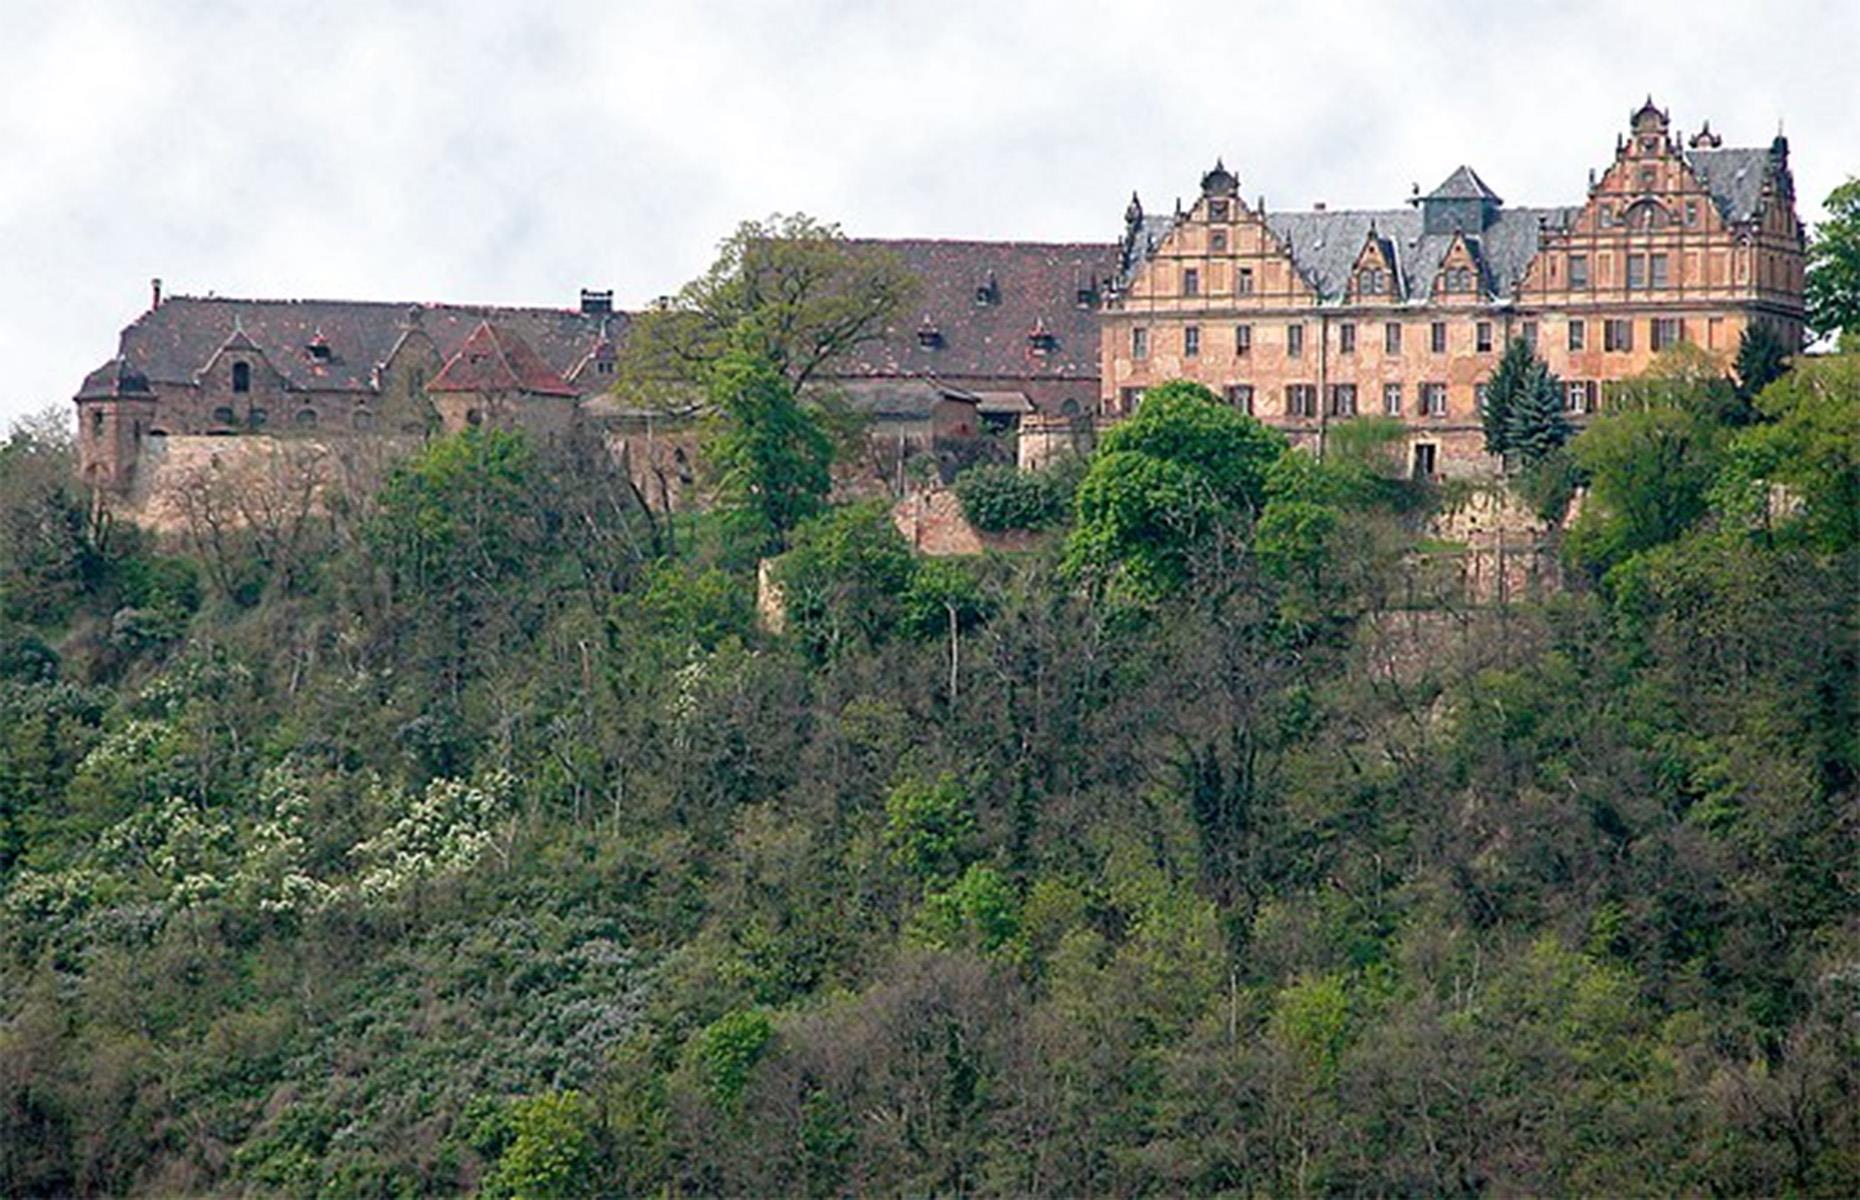 <p>This mysterious castle in the town of Querfurt, Germany, is located high up on an old vineyard, surrounded by beautiful landscapes in the middle of the beautiful region of Saale-Unstrut.</p>  <p>A dream vineyard estate, the neo-Renaissance-style building was mysteriously left deserted by its owners.</p>